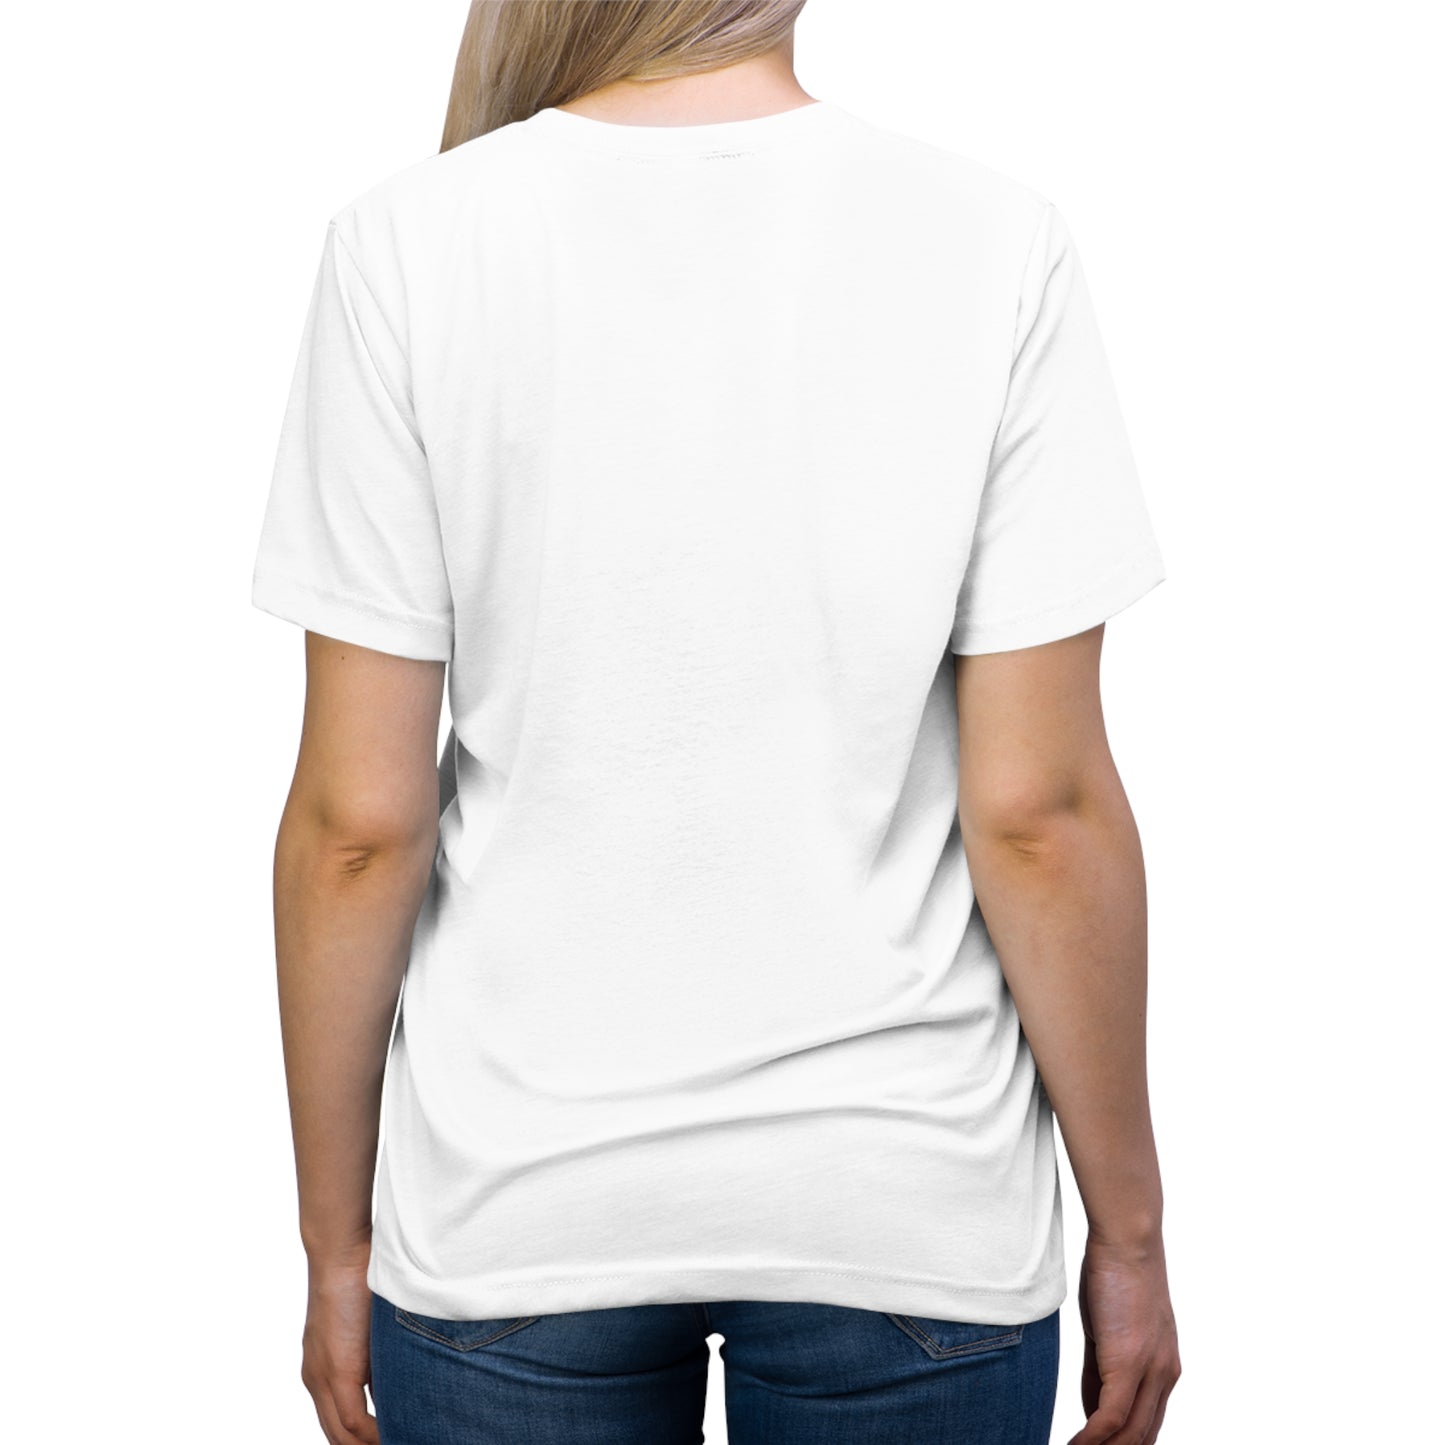 Bougie Country Girl (Logo) Triblend Tee